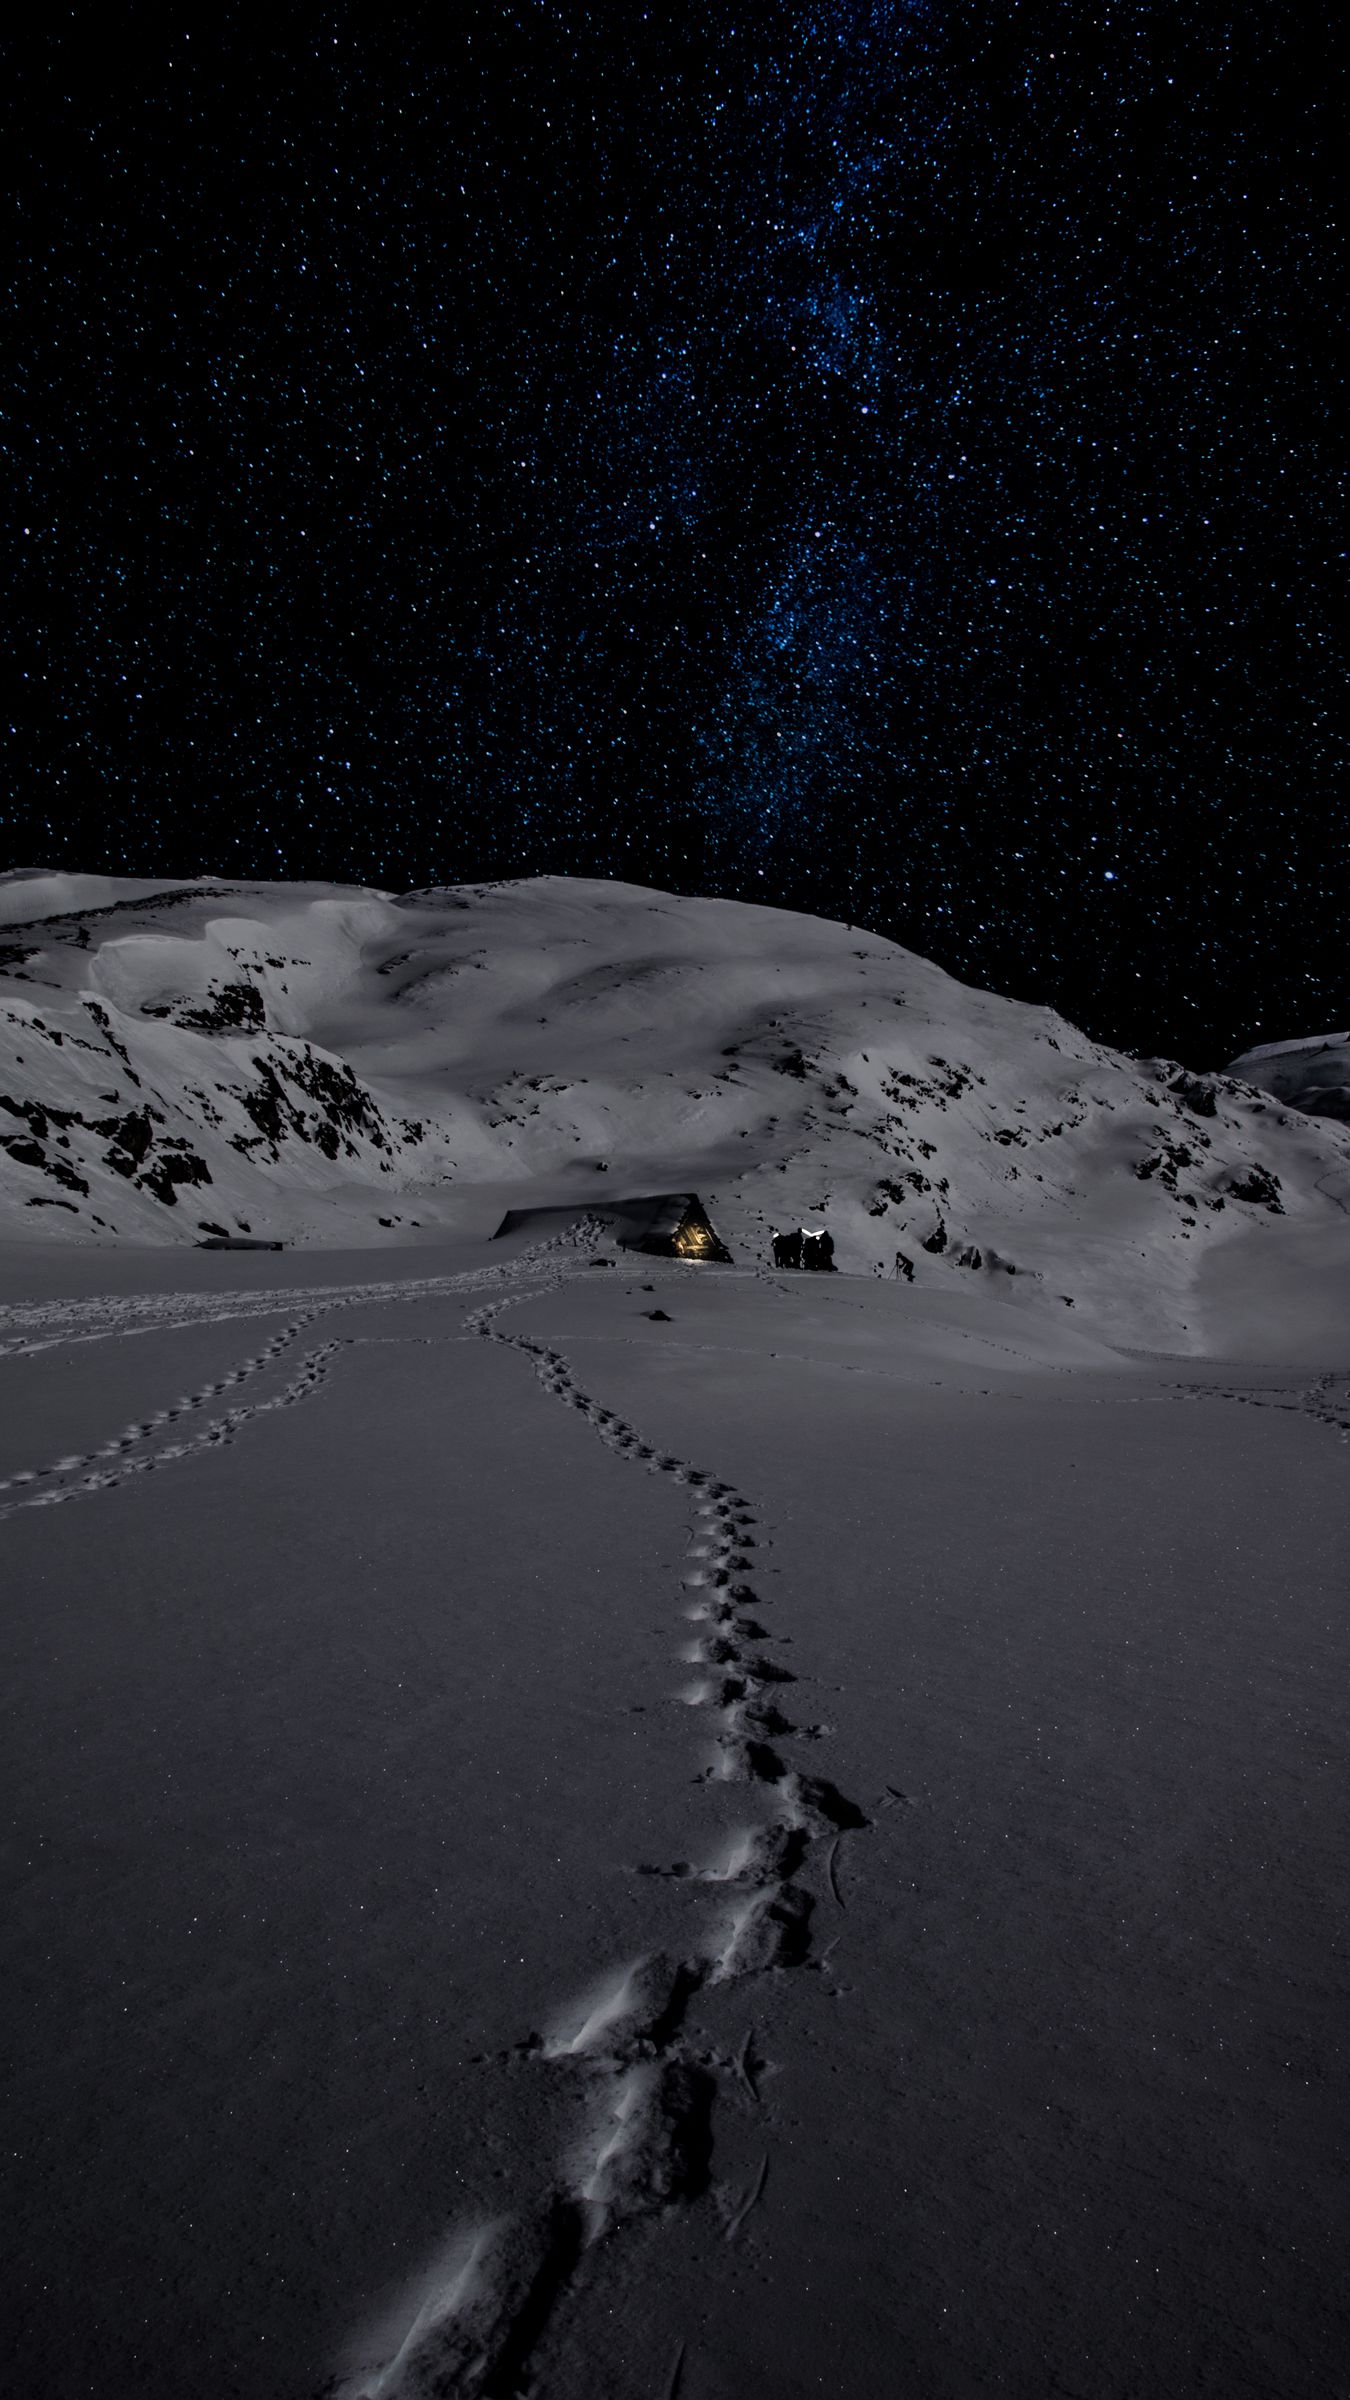 Download wallpaper 1350x2400 night, snow, mountains, footprints, winter  iphone 8+/7+/6s+/6+ for parallax hd background